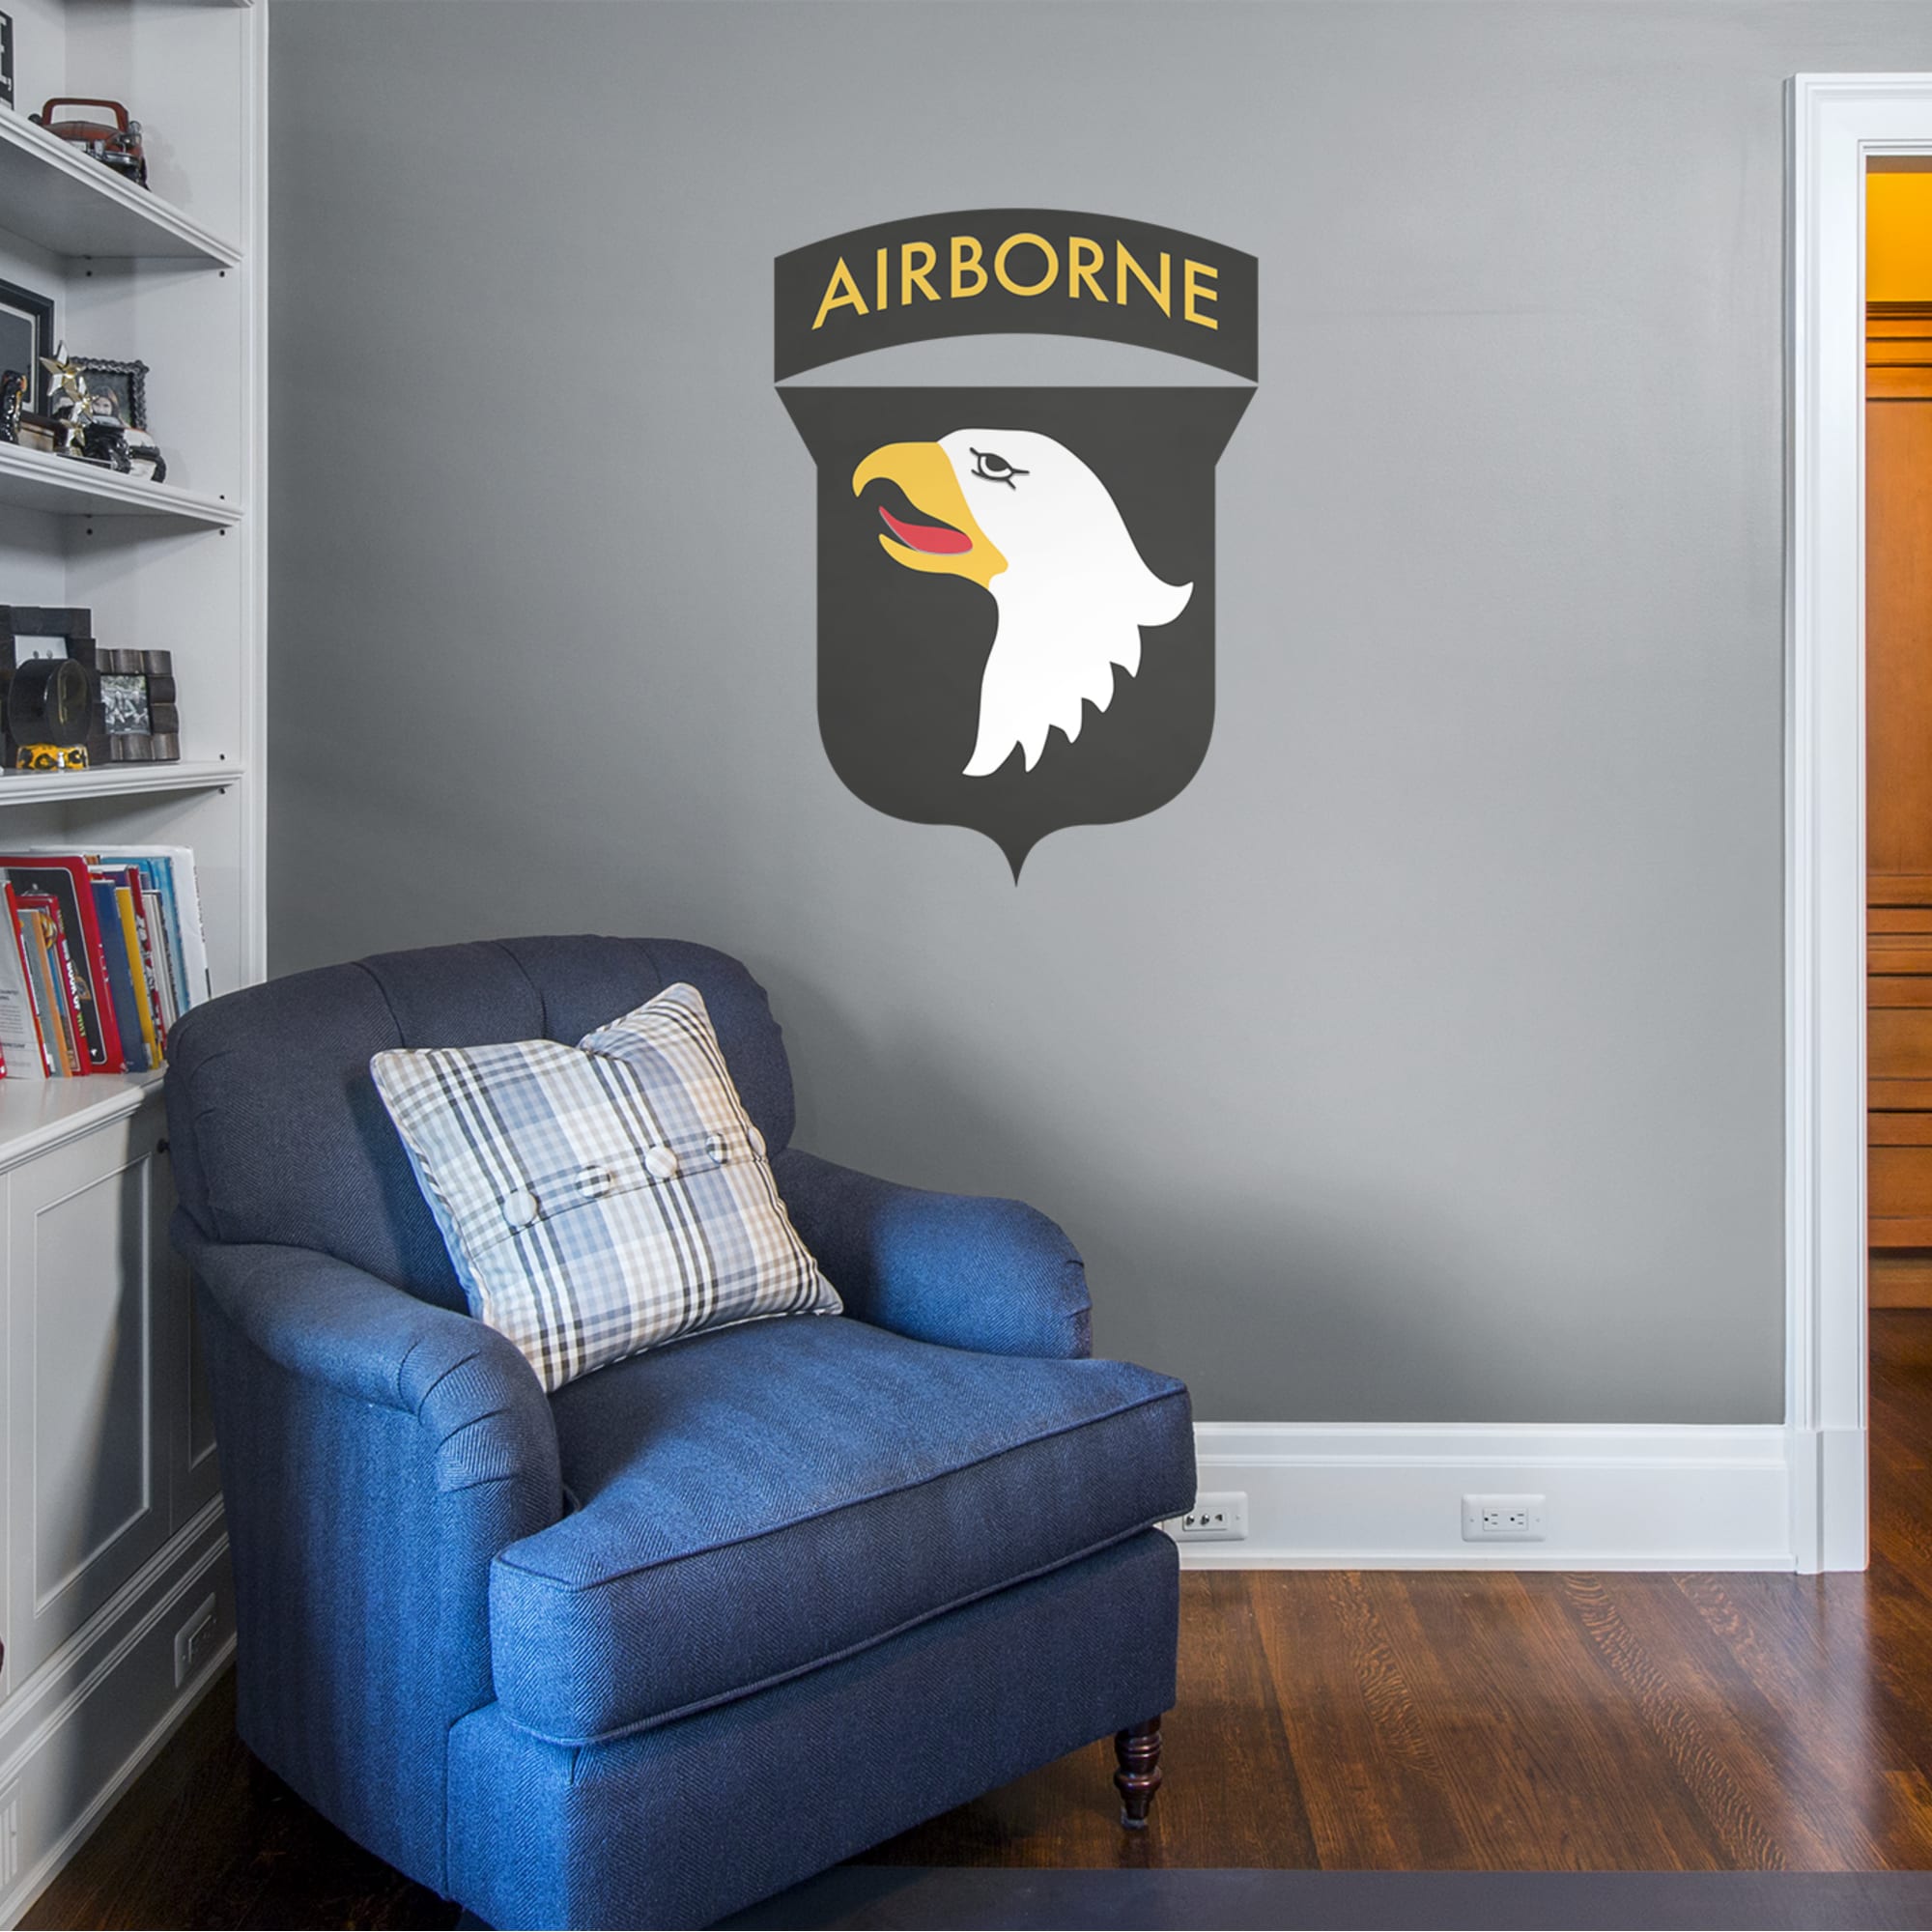 United States Army: 101st Airborne Insignia - Officially Licensed Removable Wall Decal 27.0"W x 38.0"H by Fathead | Vinyl